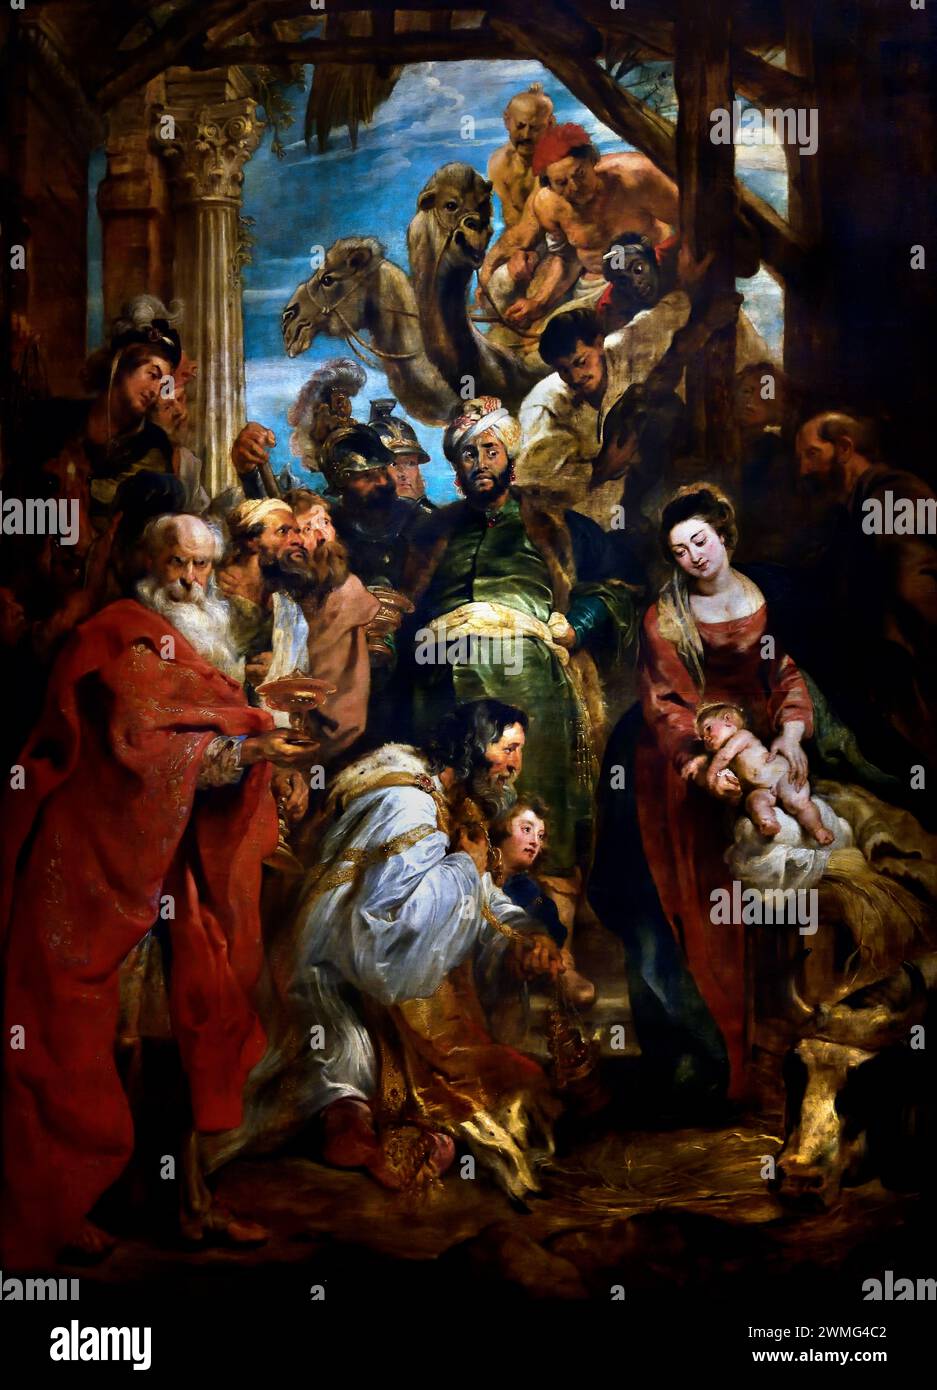 The Adoration of the Magi by Peter Paul Rubens.(1577-1640).  Flemish artist and diplomat, Flemish, Baroque  Royal Museum of Fine Arts,  Antwerp, Belgium, Belgian. Adoration, Magi, Adoration of the Kings , Nativity of Jesus, Three Magi, represented as kings, found Jesus by following a star, lay before him gifts of gold, frankincense, and myrrh, and worship him Stock Photo